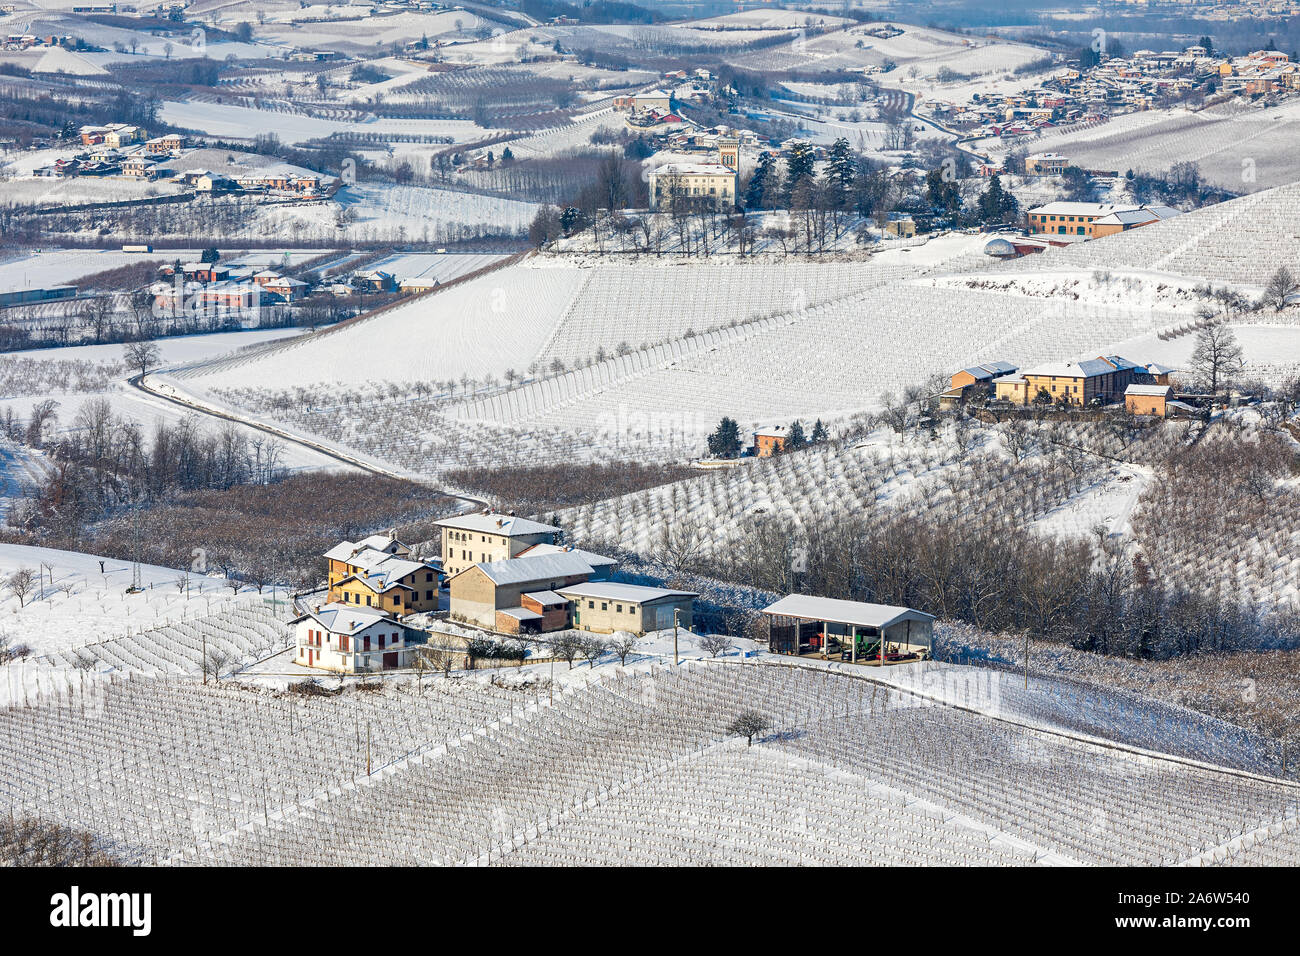 View from above an hamlets and villages among vineyards on the hills covered in snow in Piedmont, Northern Italy. Stock Photo